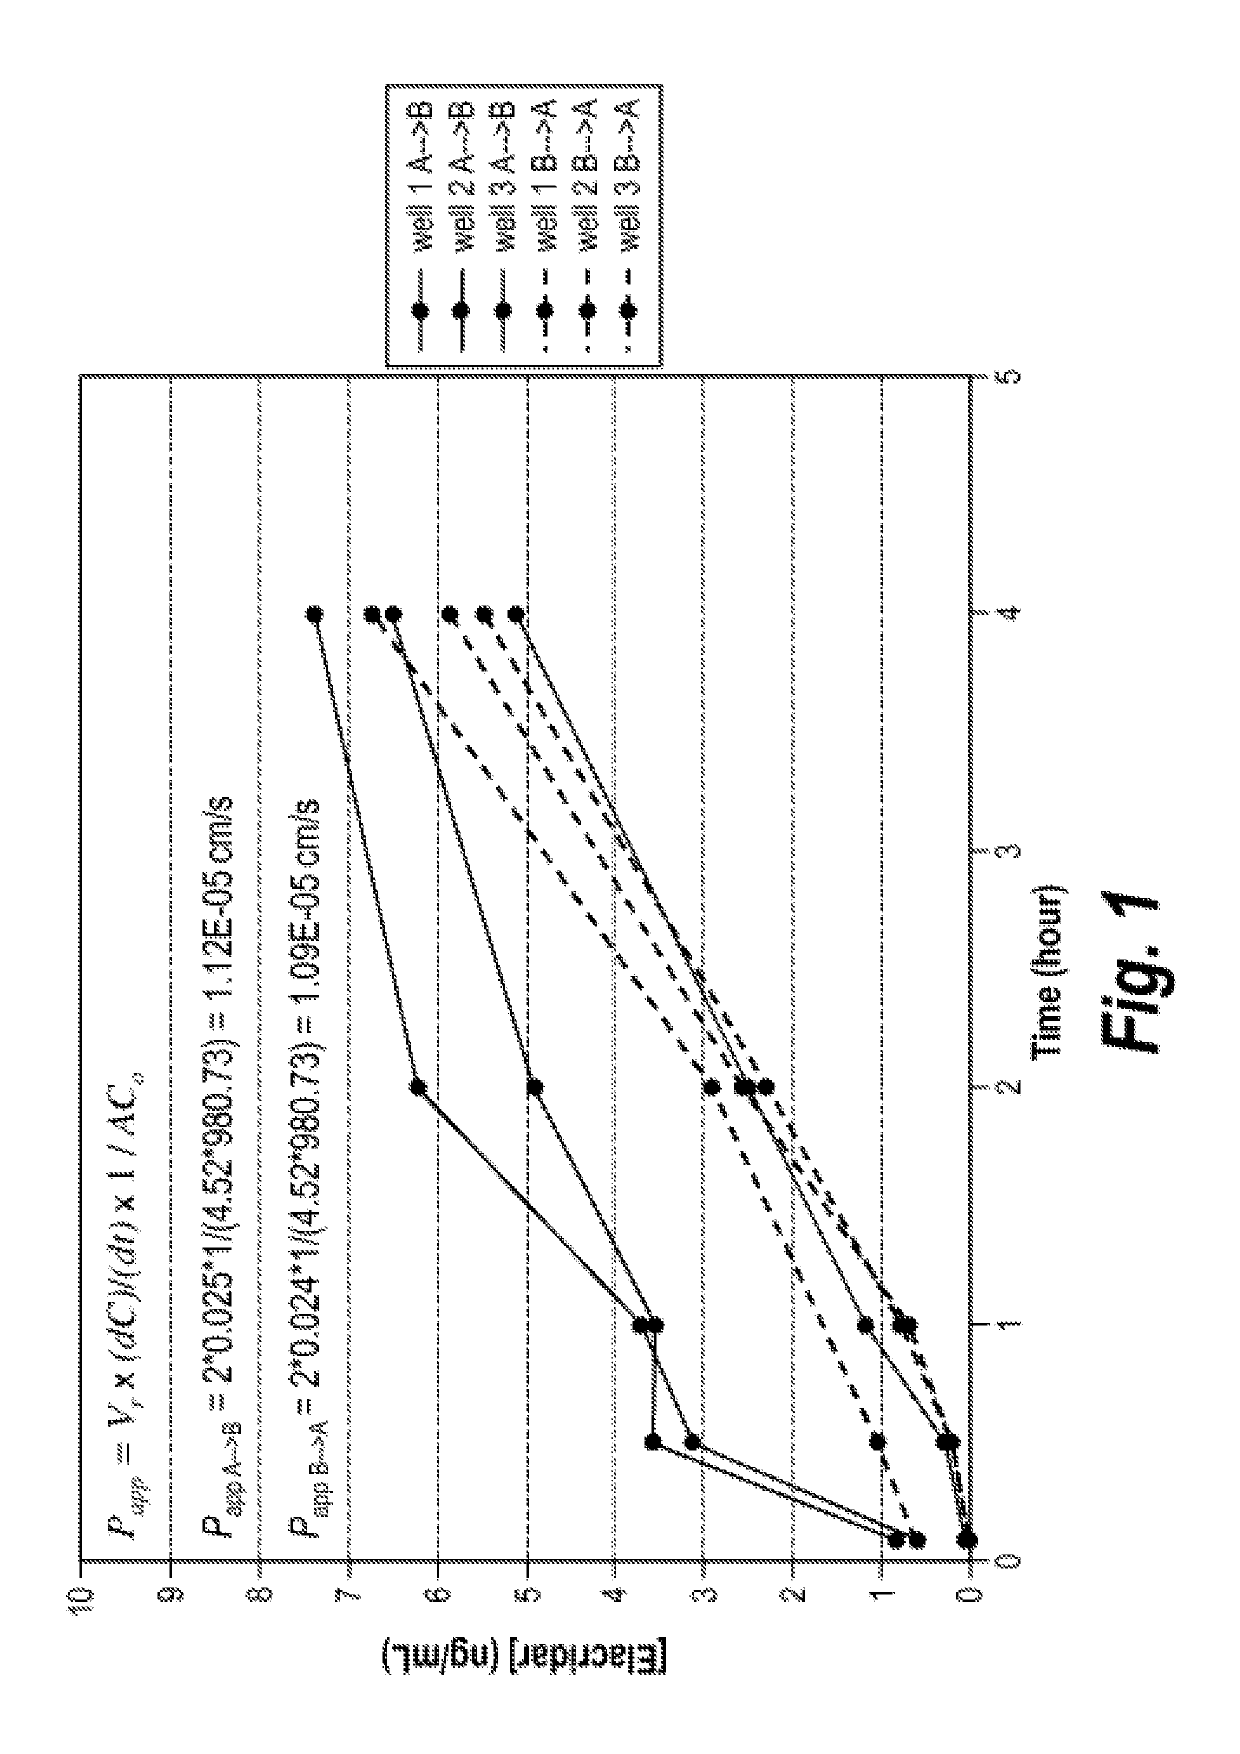 Efflux inhibitor  compositions and methods of treatment using the same